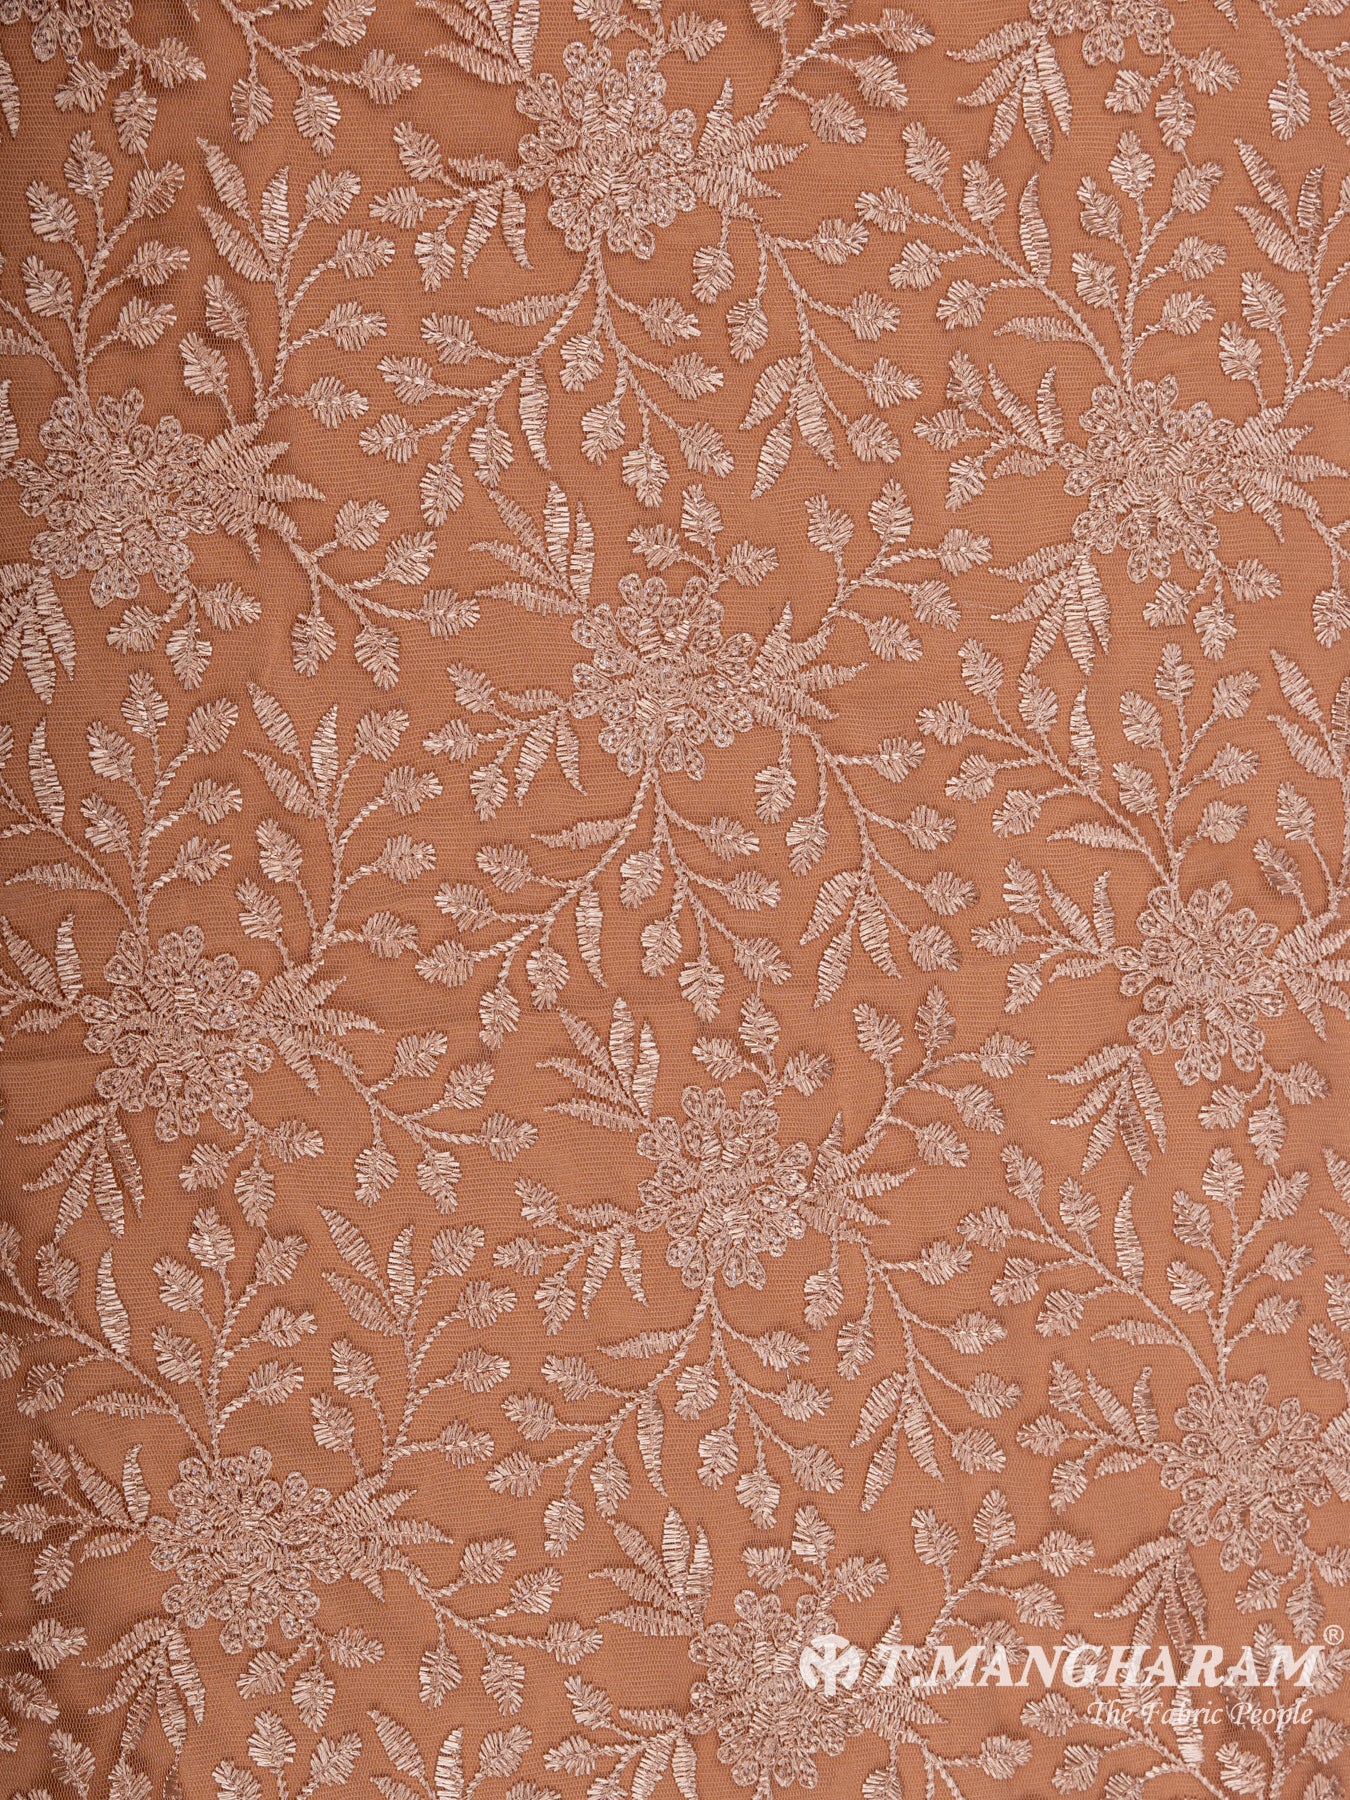 Peach Net Embroidery Fabric - EC6547 view-3